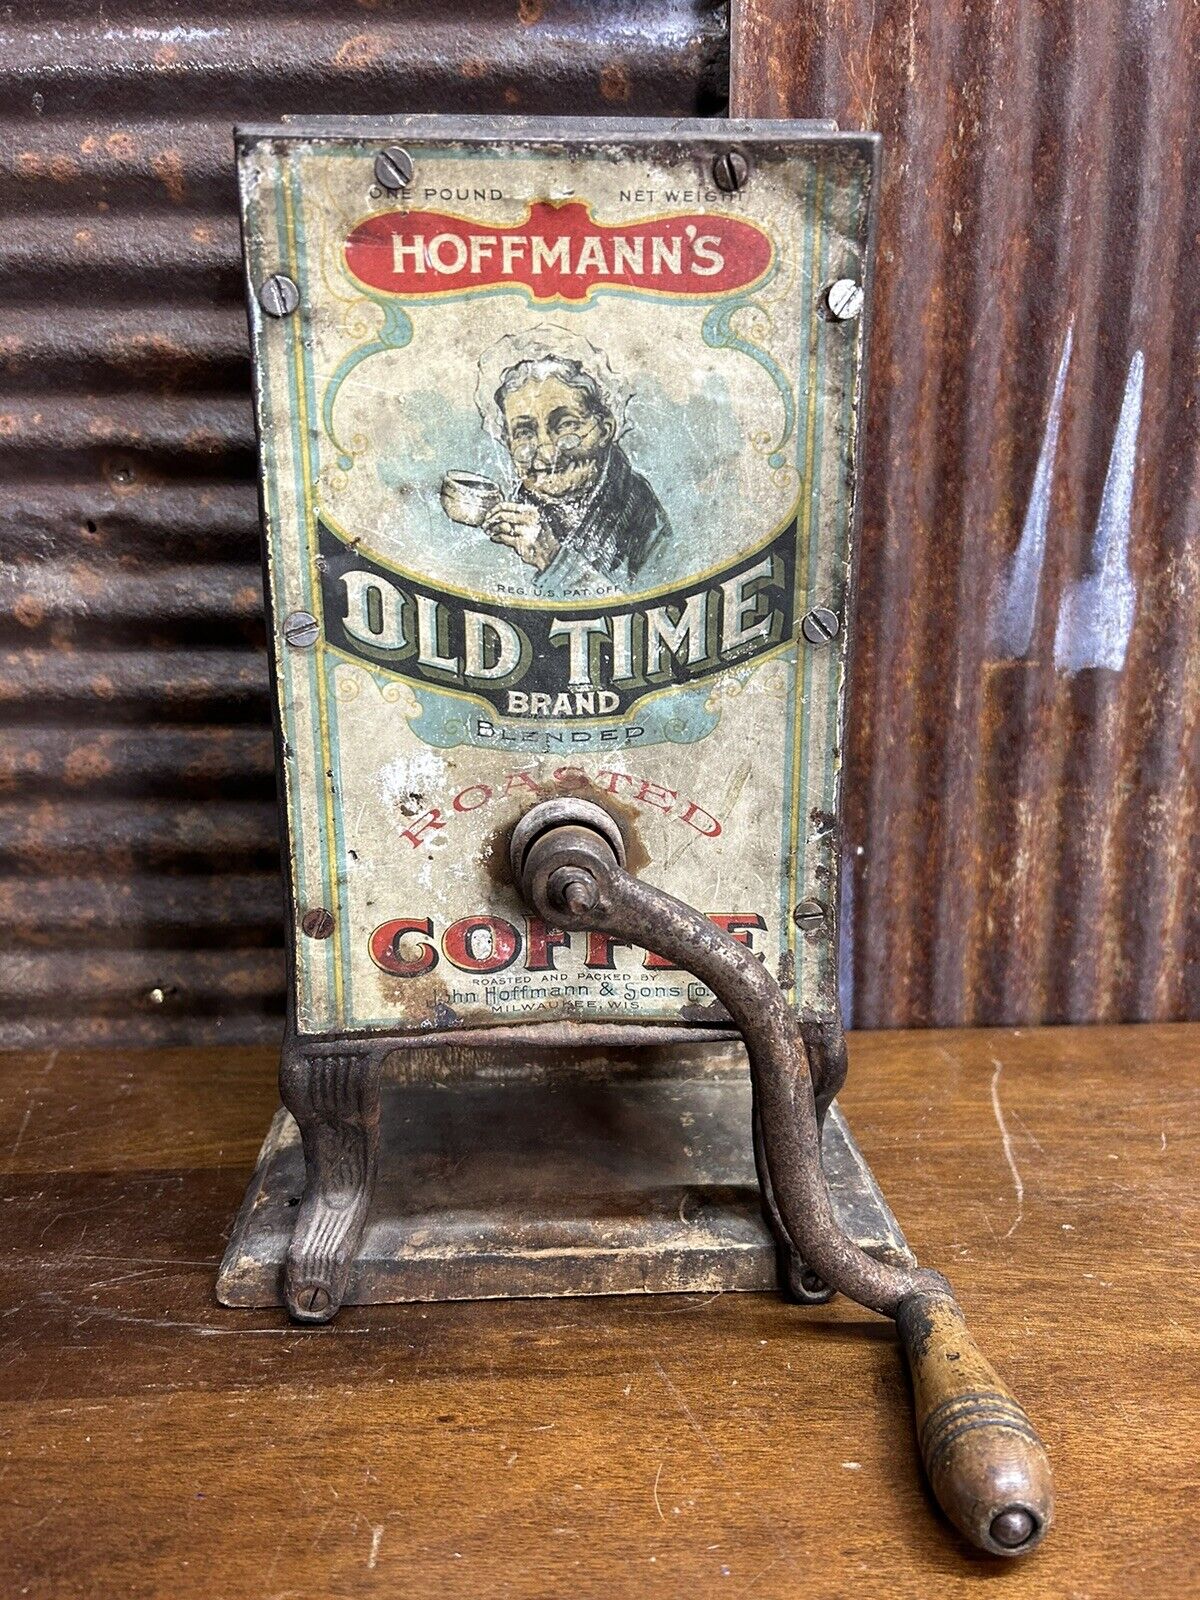 Hoffman’s Old Time Brand Roasted Antique Coffee Grinder Country Store tin sign